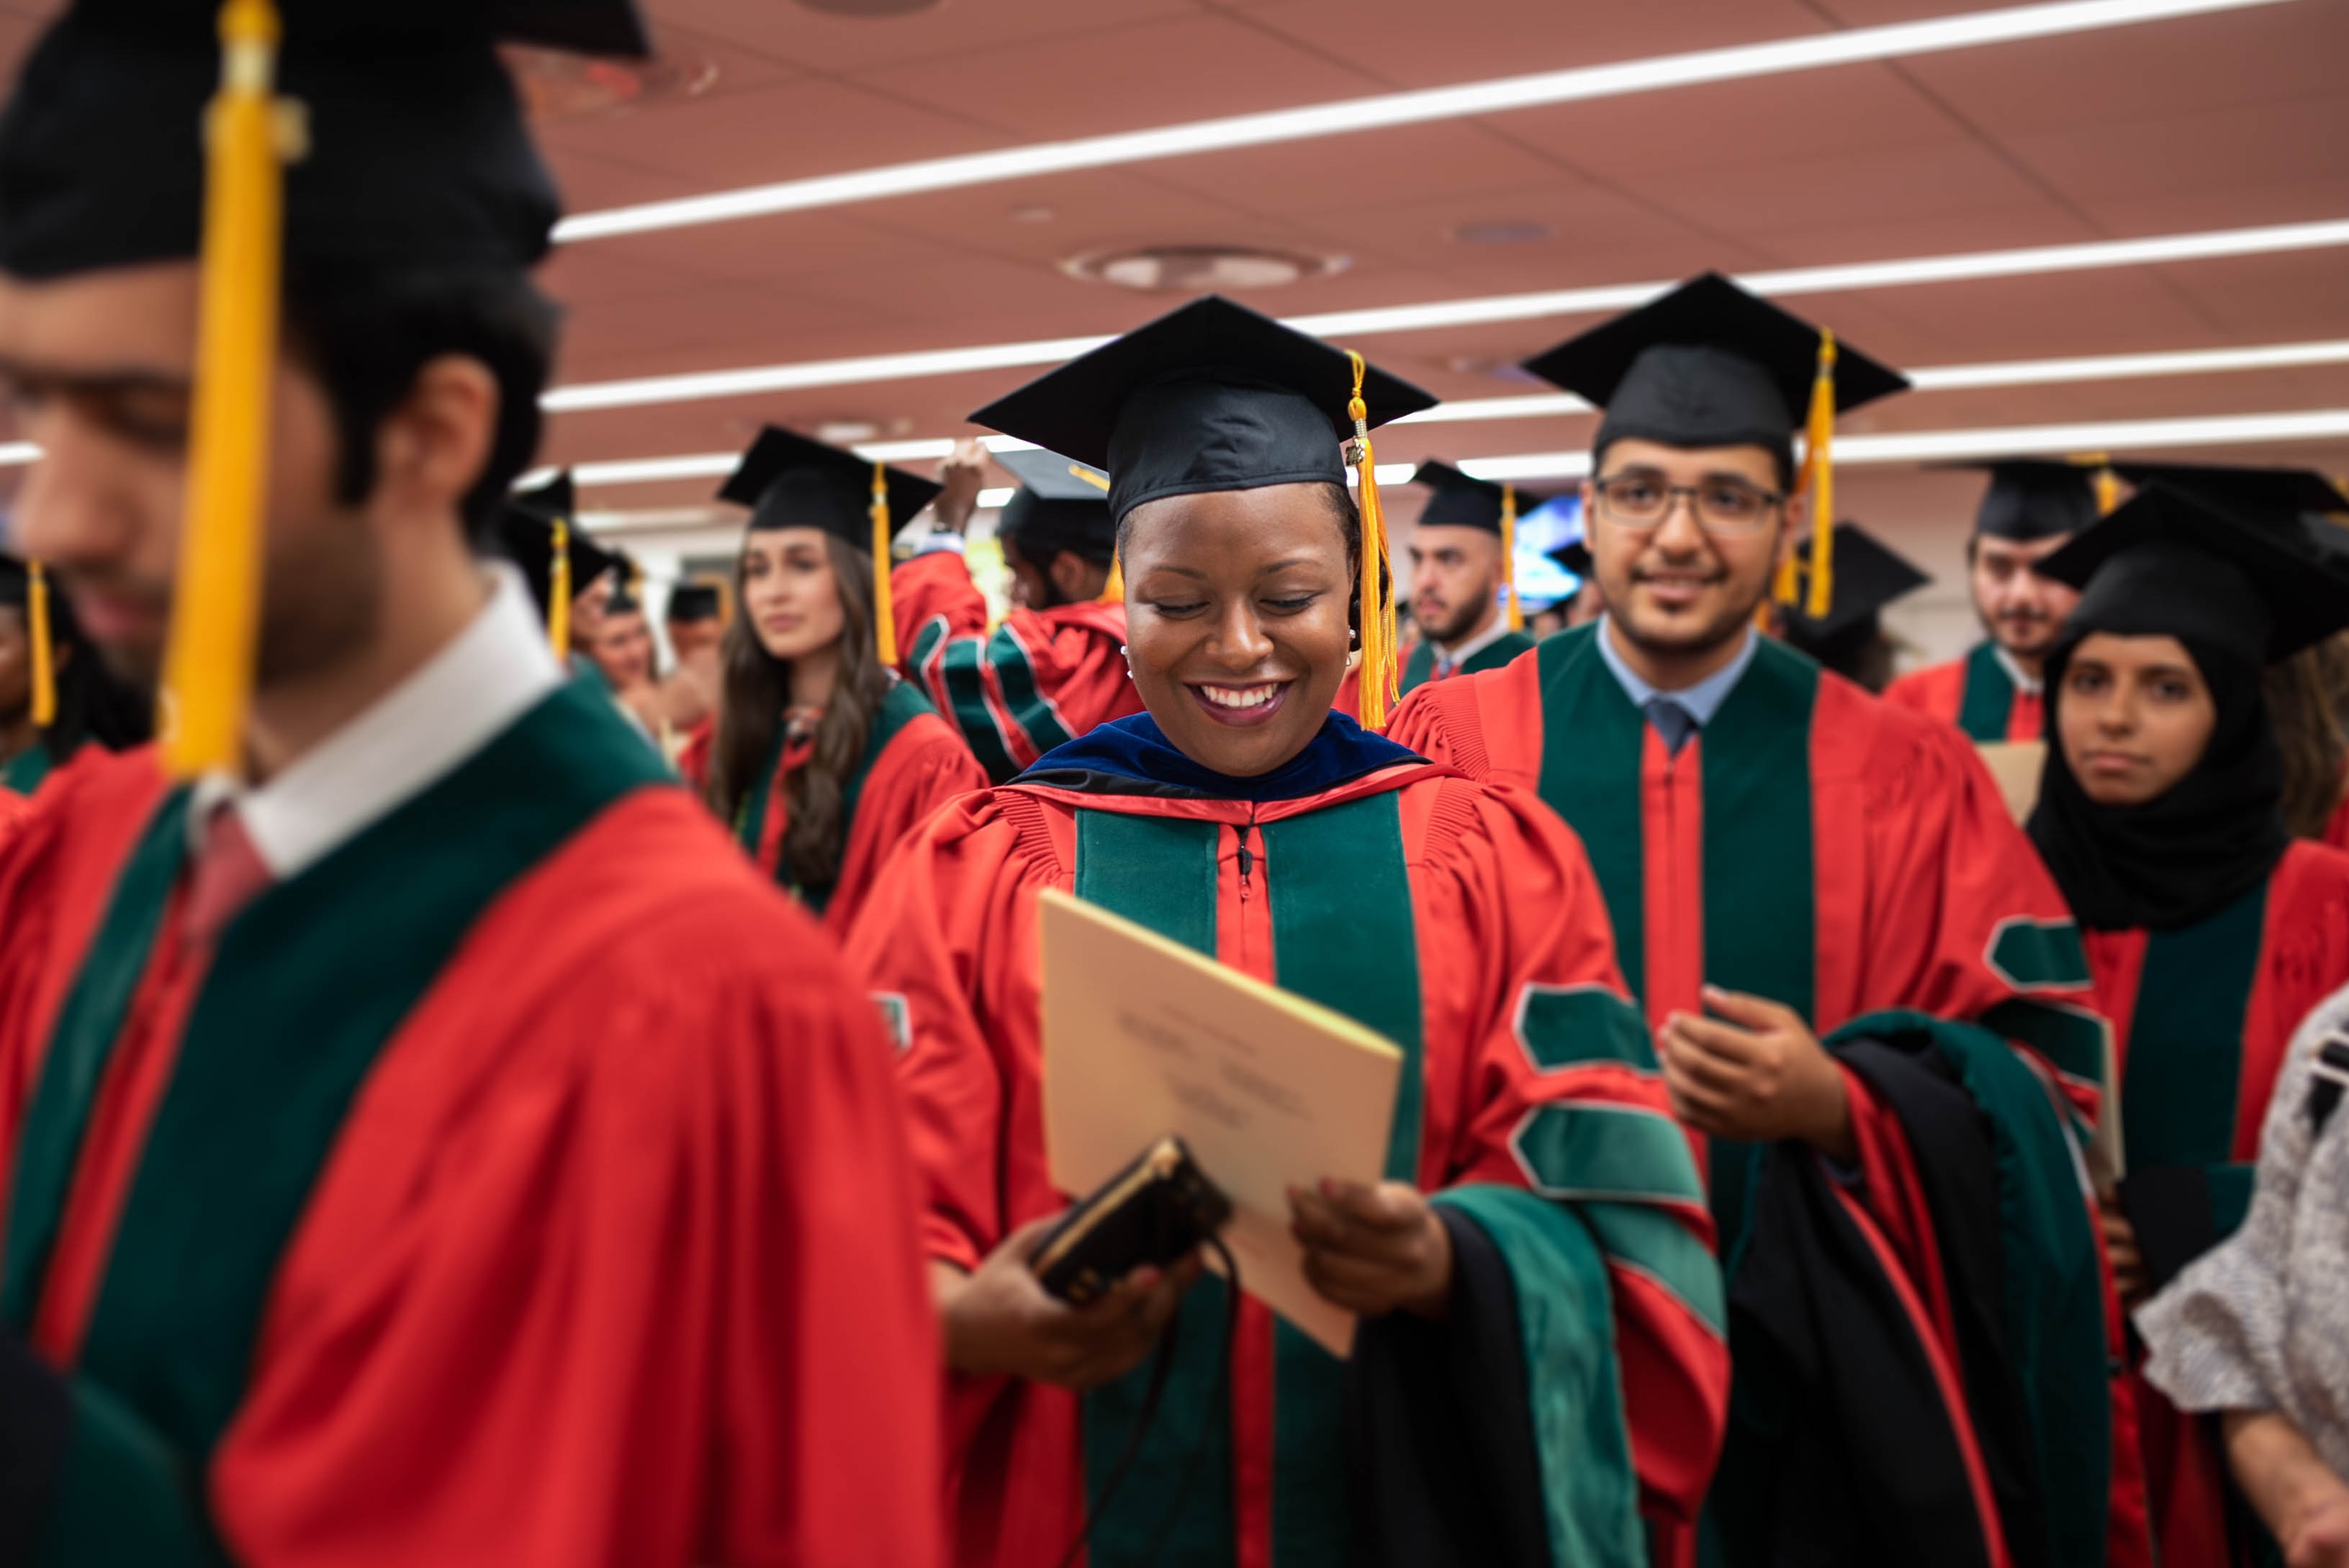 Dr. Rolake Alabi, MD’18, PhD’16 waits backstage before the Commencement ceremony on May 31. All photos taken by Amelia Panico. Click photo to view the full Commencement Flickr gallery.